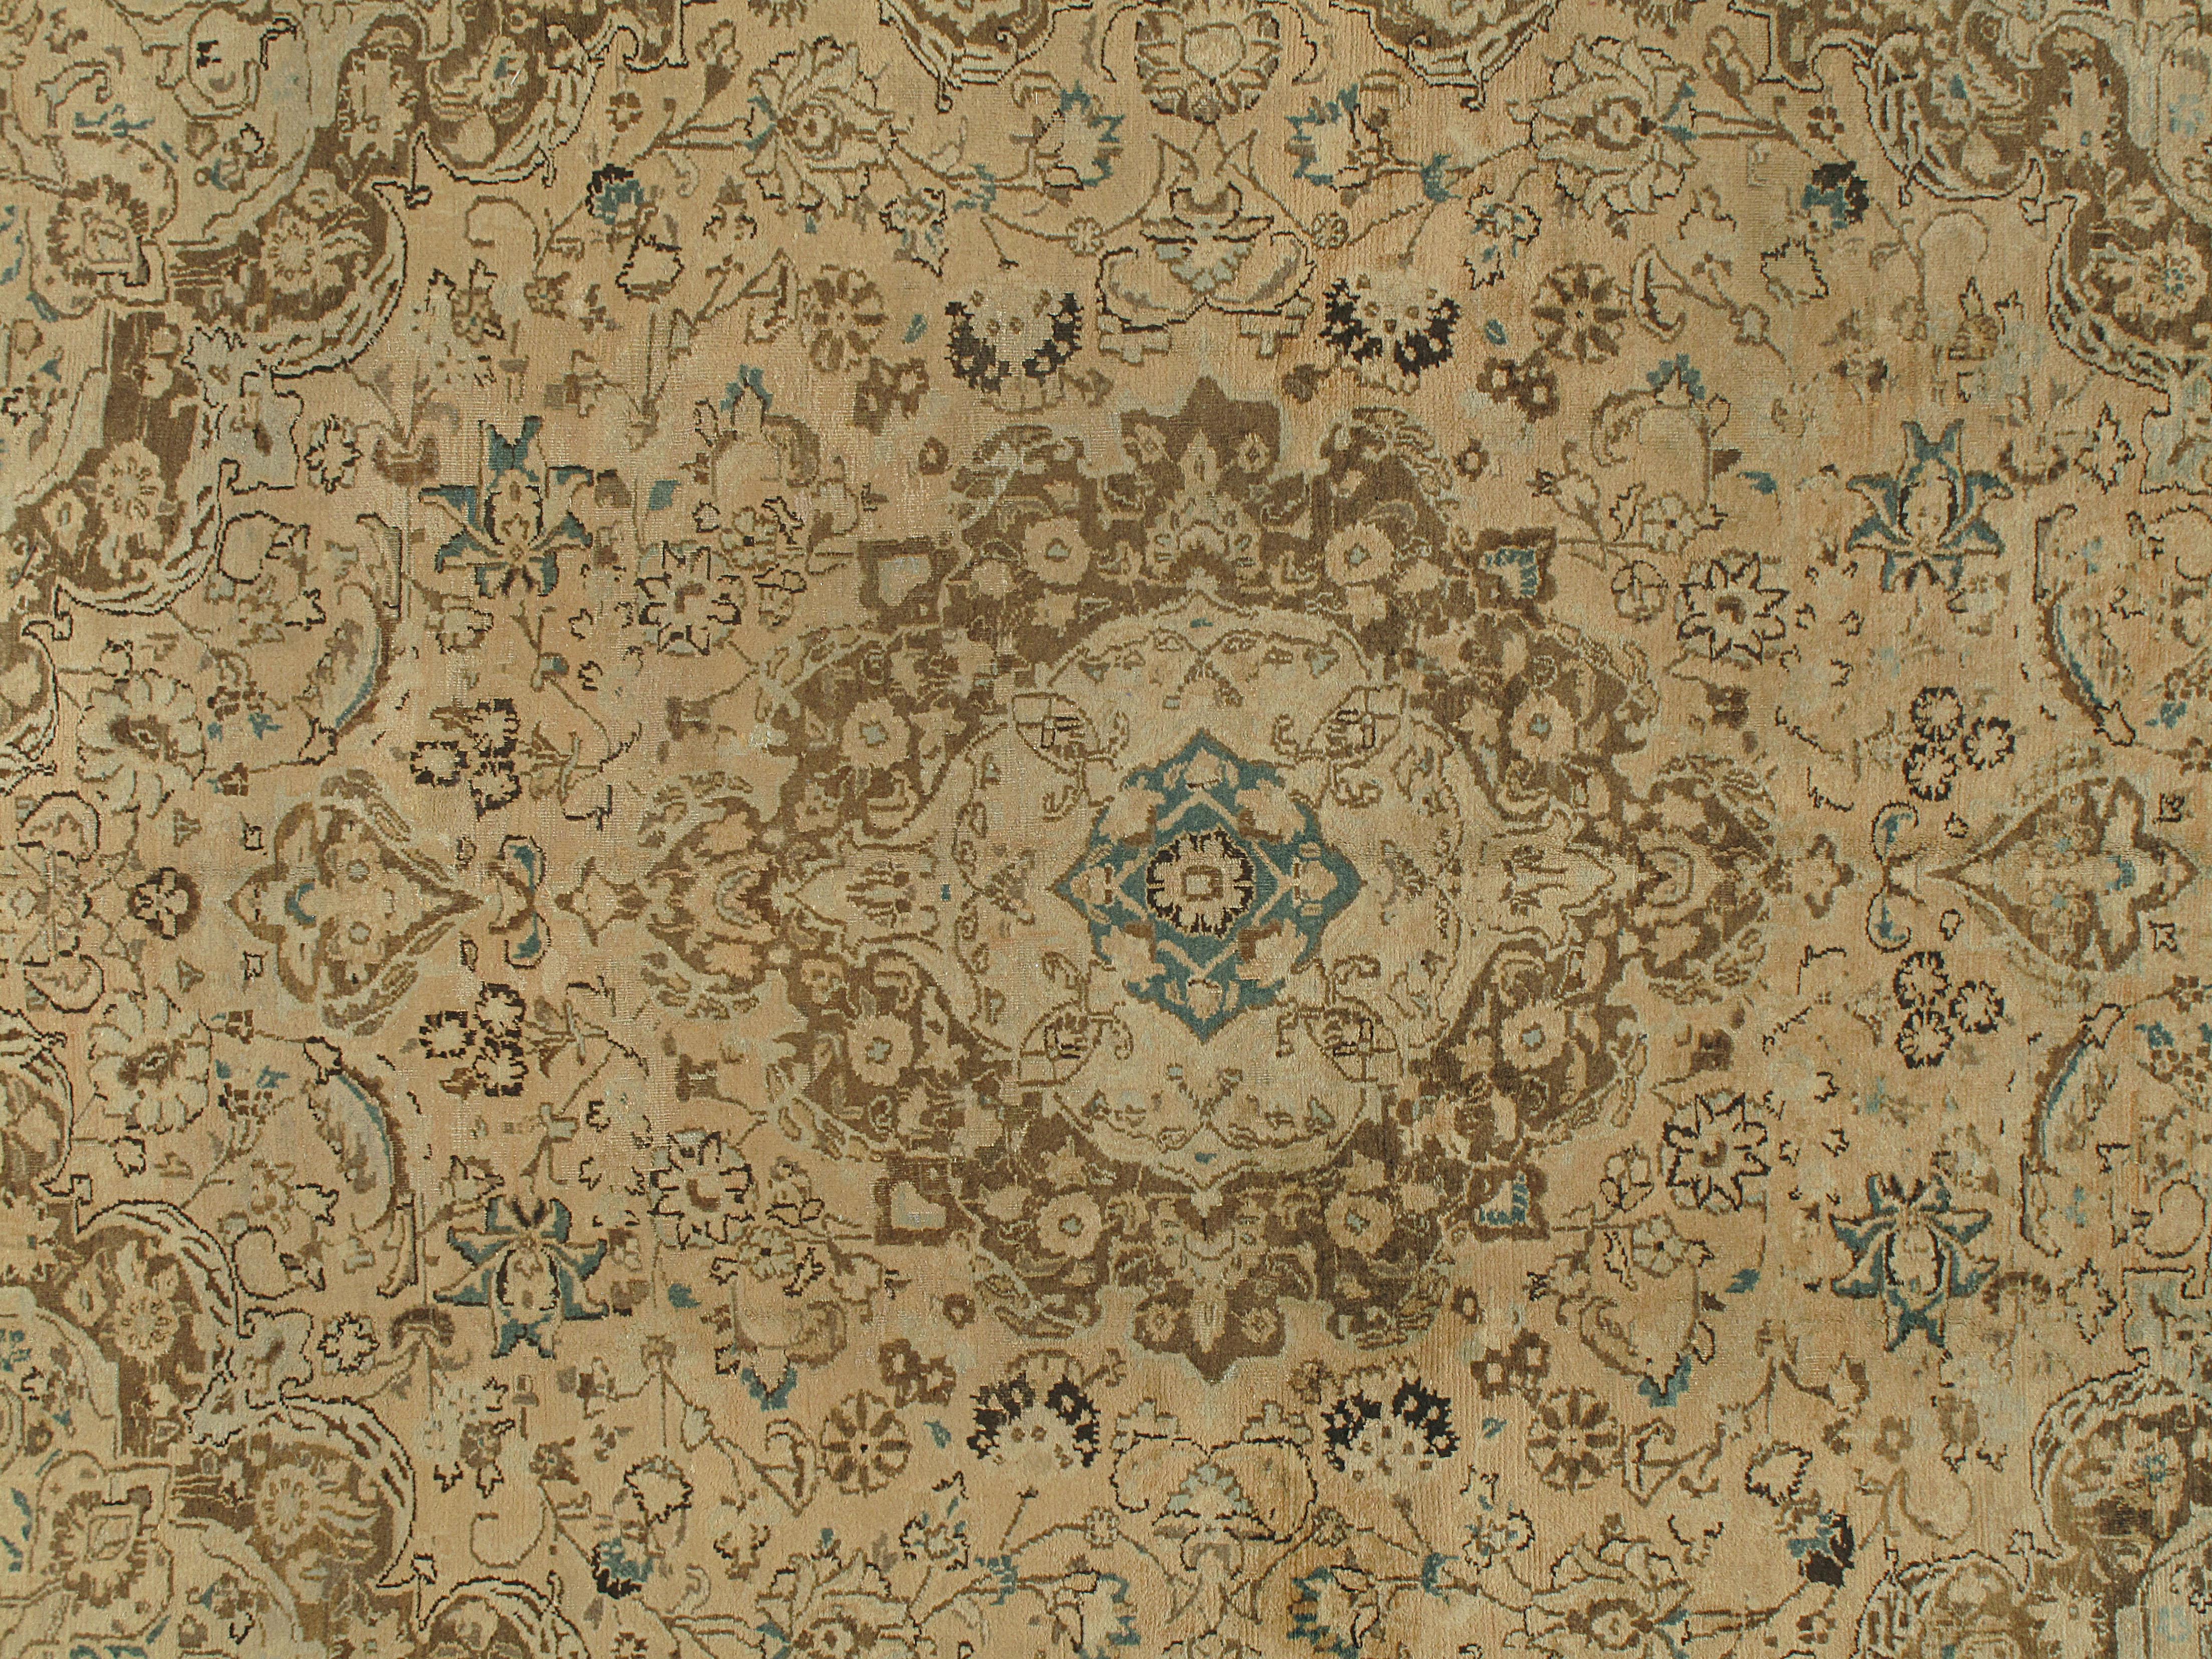 Vintage Persian Meshad Rug 8' x 10'. This charming Meshad rug entertains the eye with its curvileaner design and elegant central medallion. The piece, masterfully woven in cream and chocolate, will naturally become the focal point in any setting.